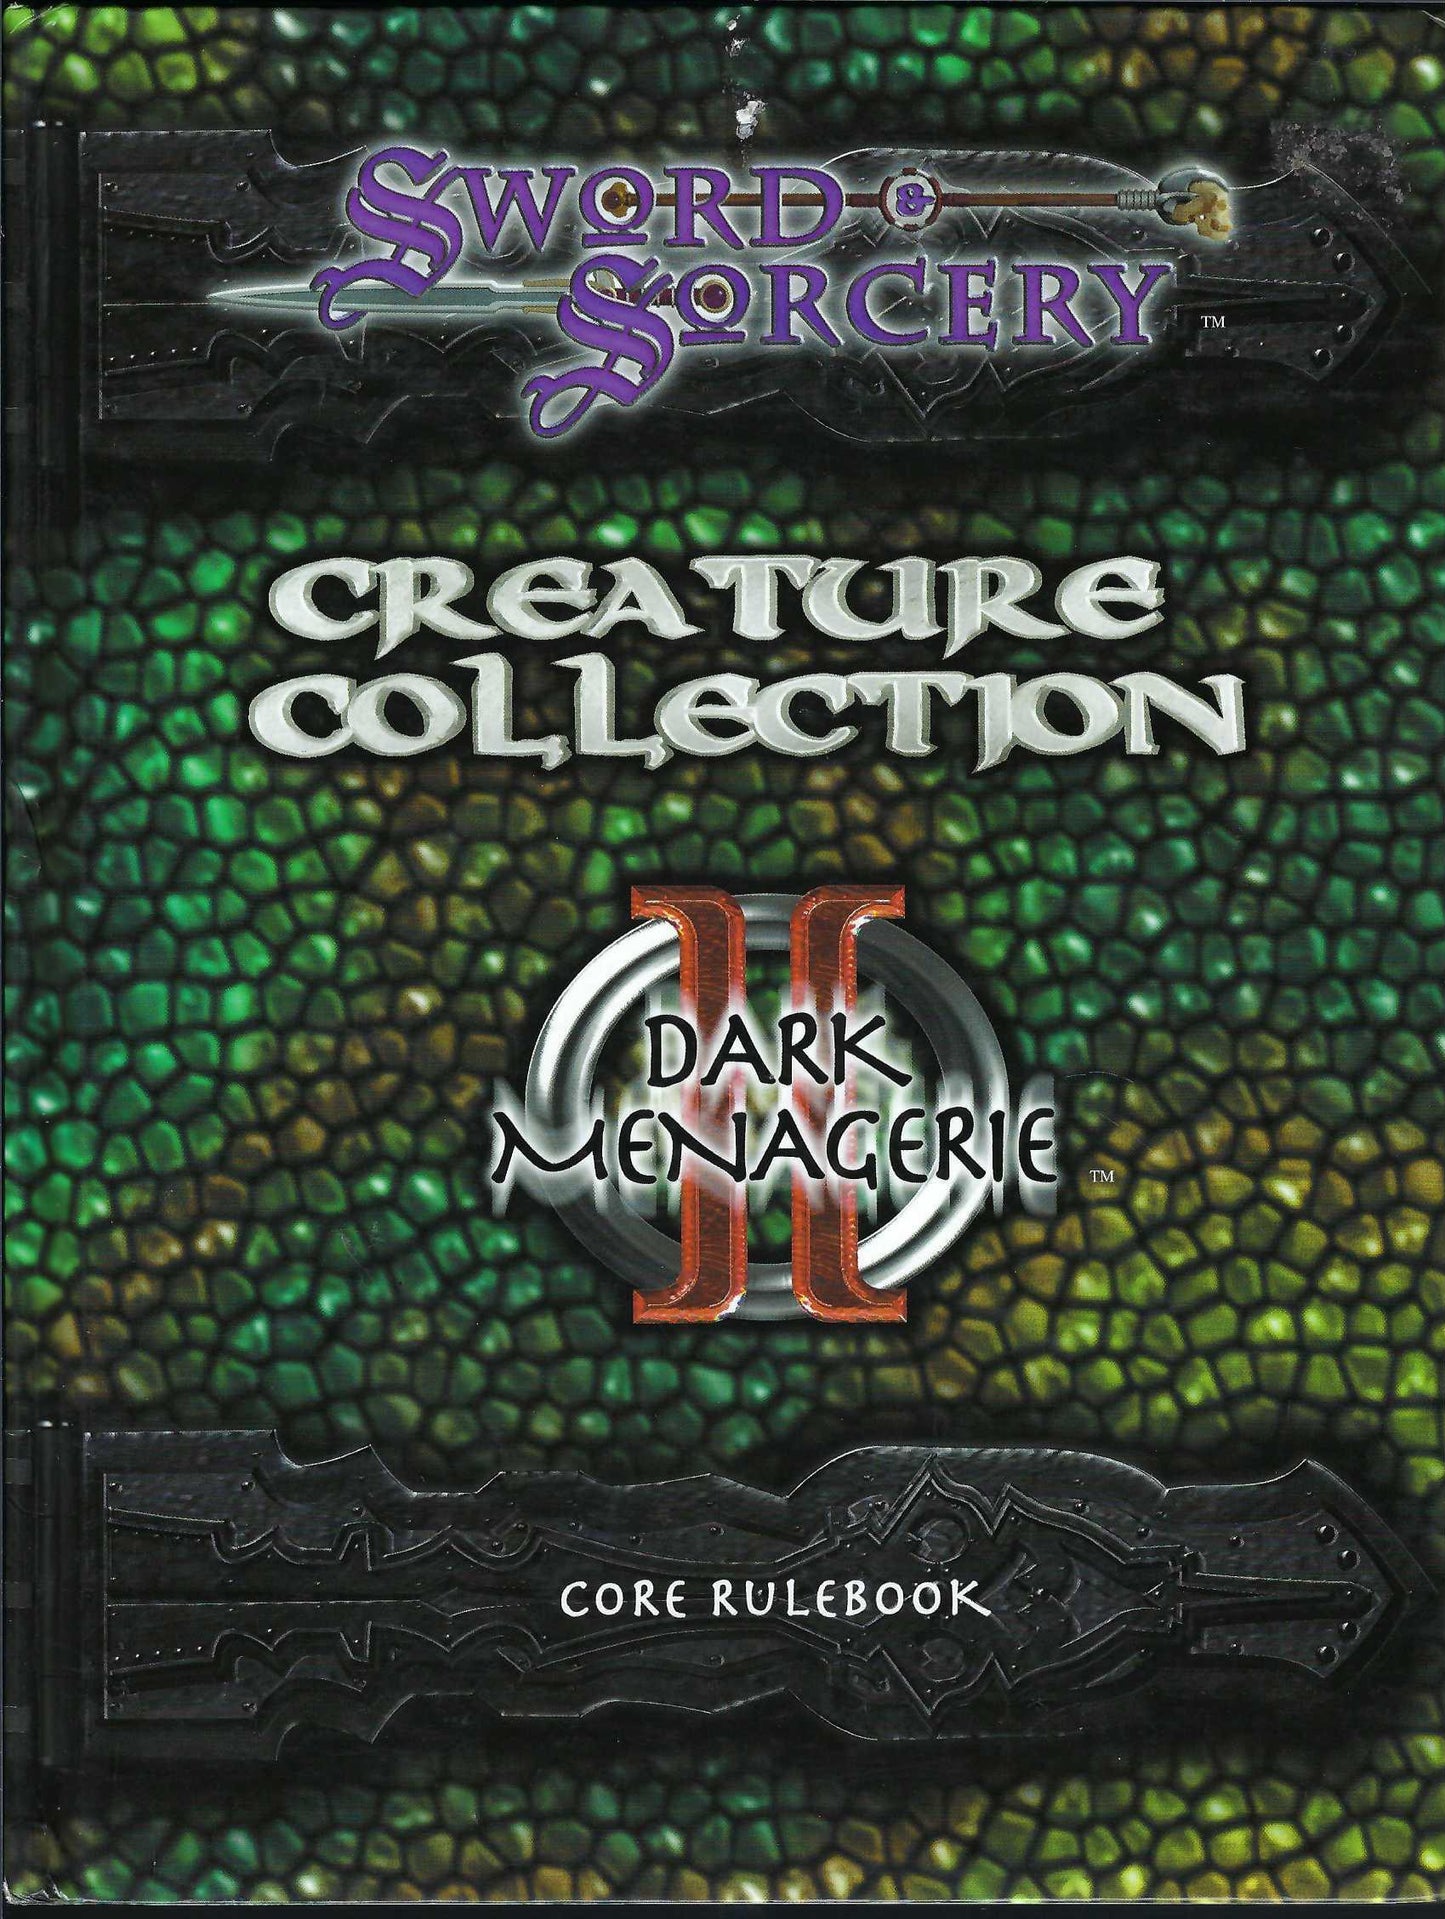 Creature Collection II Dark Menagerie (Sword and Sorcery)